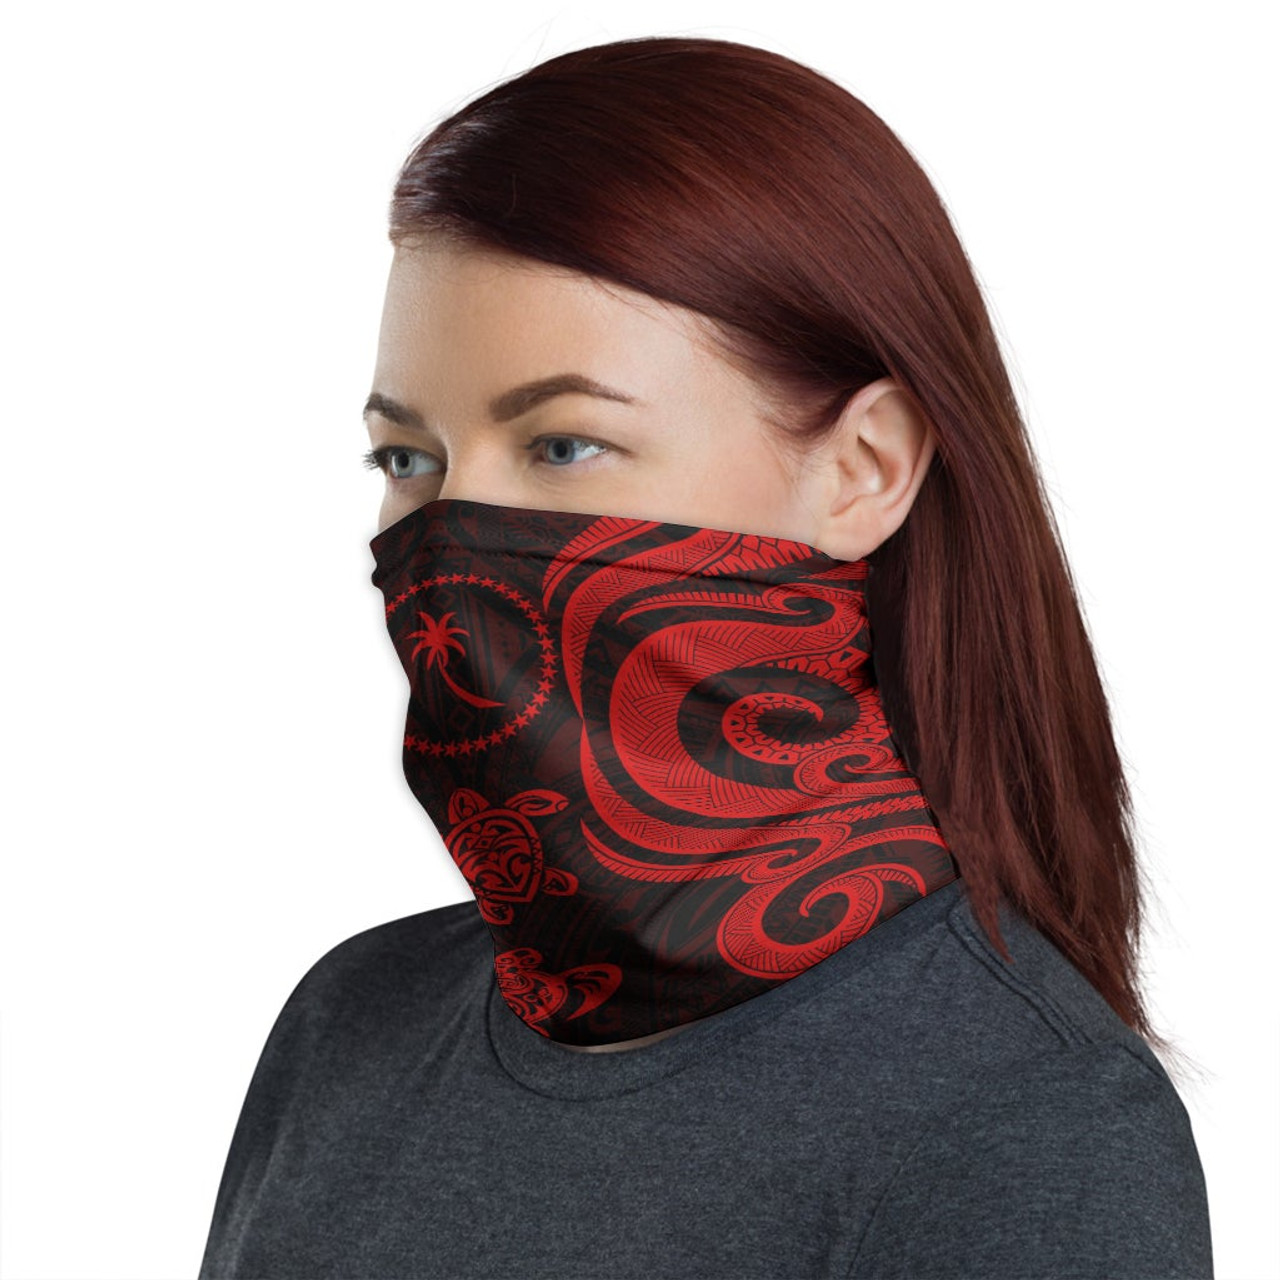 Chuuk Neck Gaiter - Turtle Tentacle Red 1